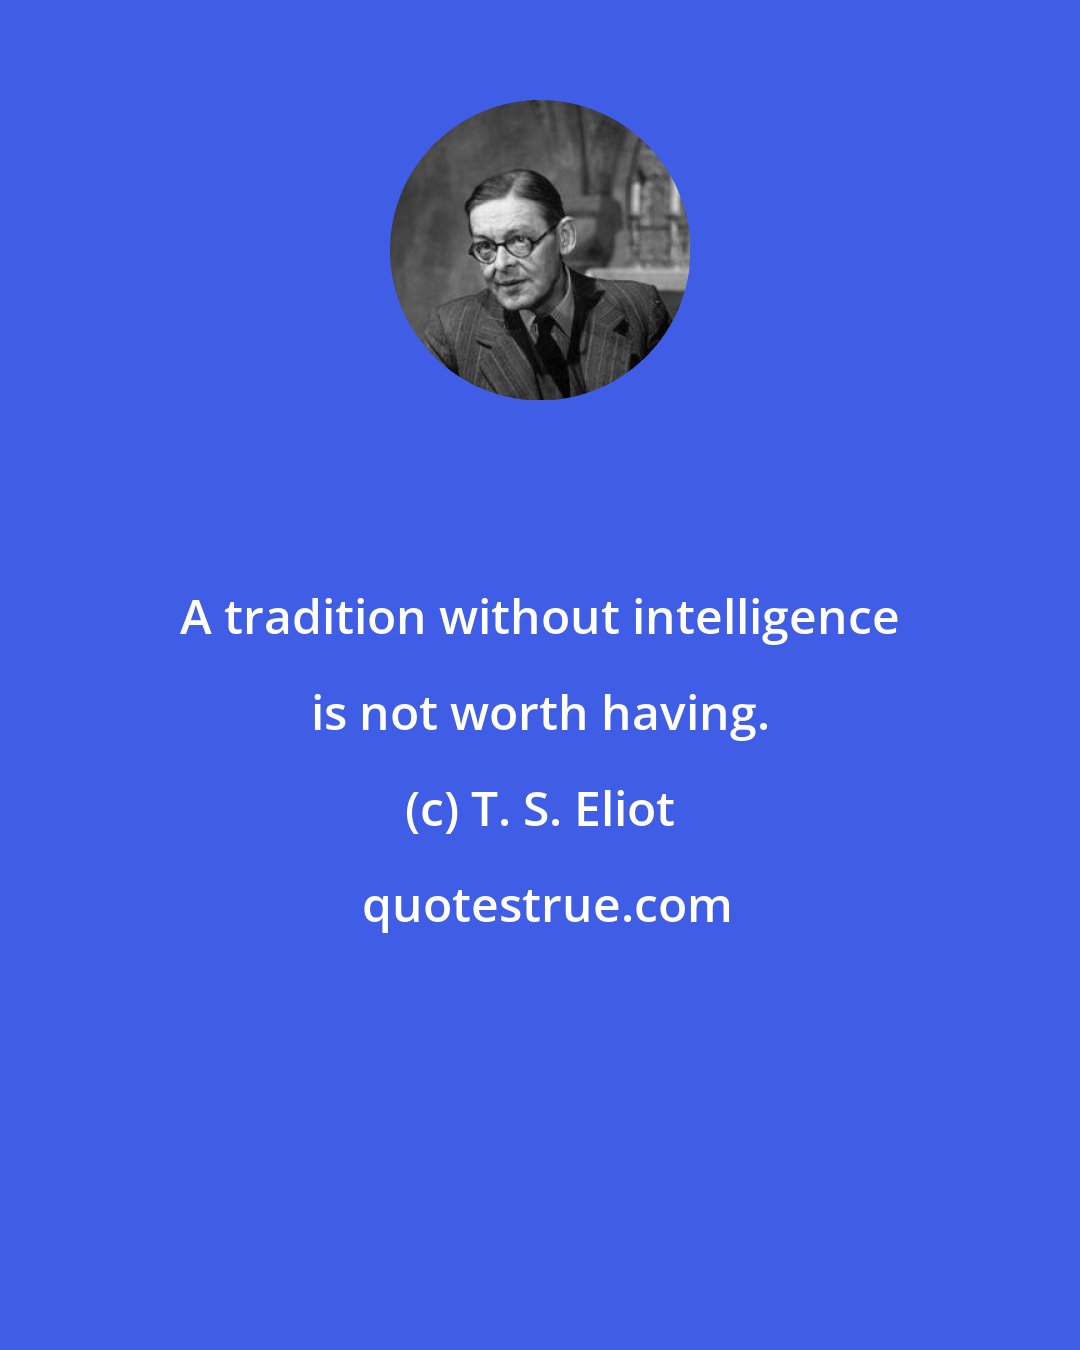 T. S. Eliot: A tradition without intelligence is not worth having.